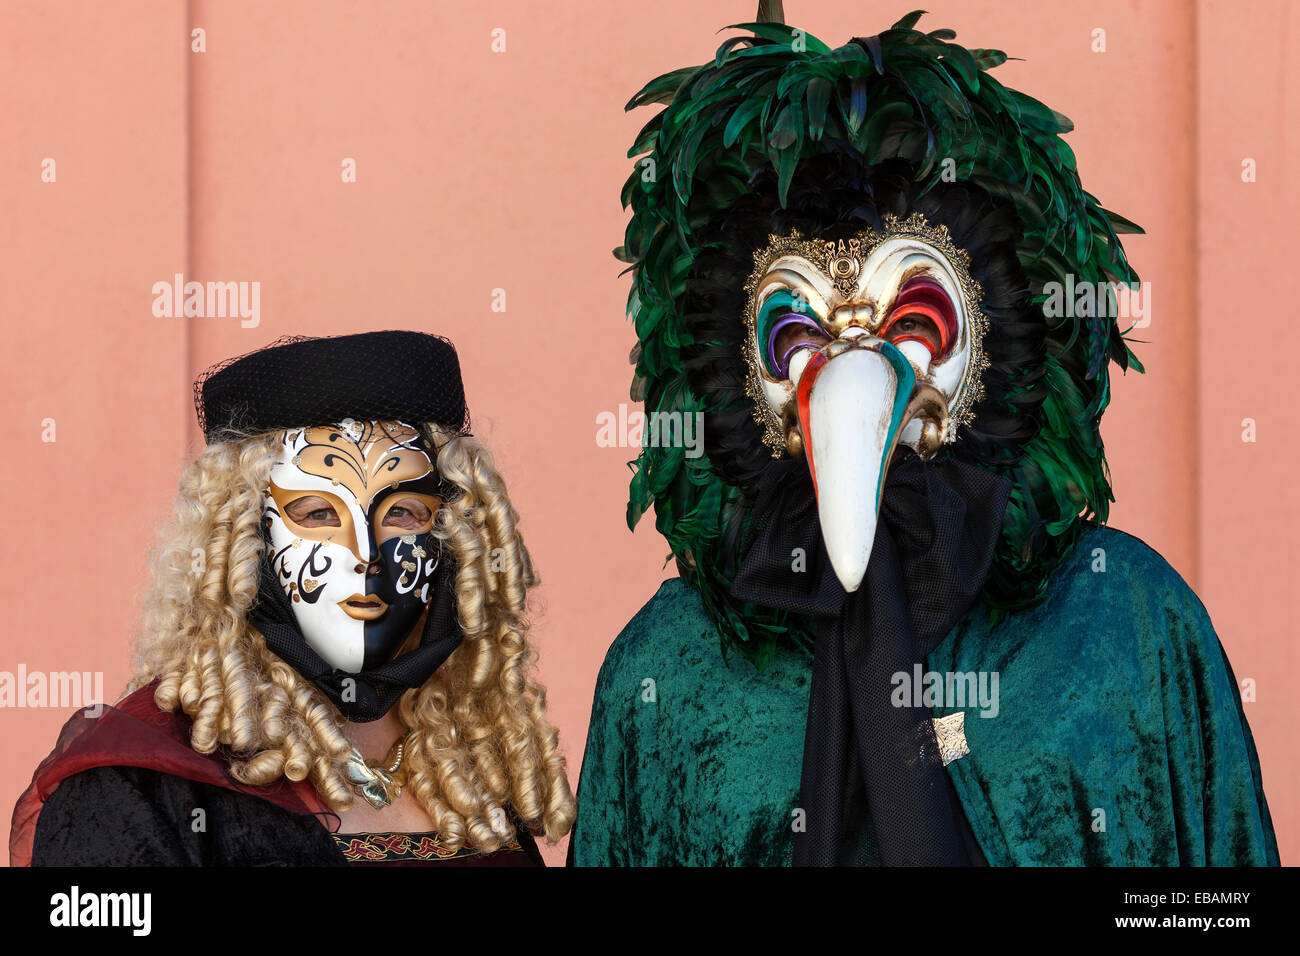 Venetian Carnival masks and costumes at the Venetian Fair, Ludwigsburg, Baden-Württemberg, Germany Stock Photo